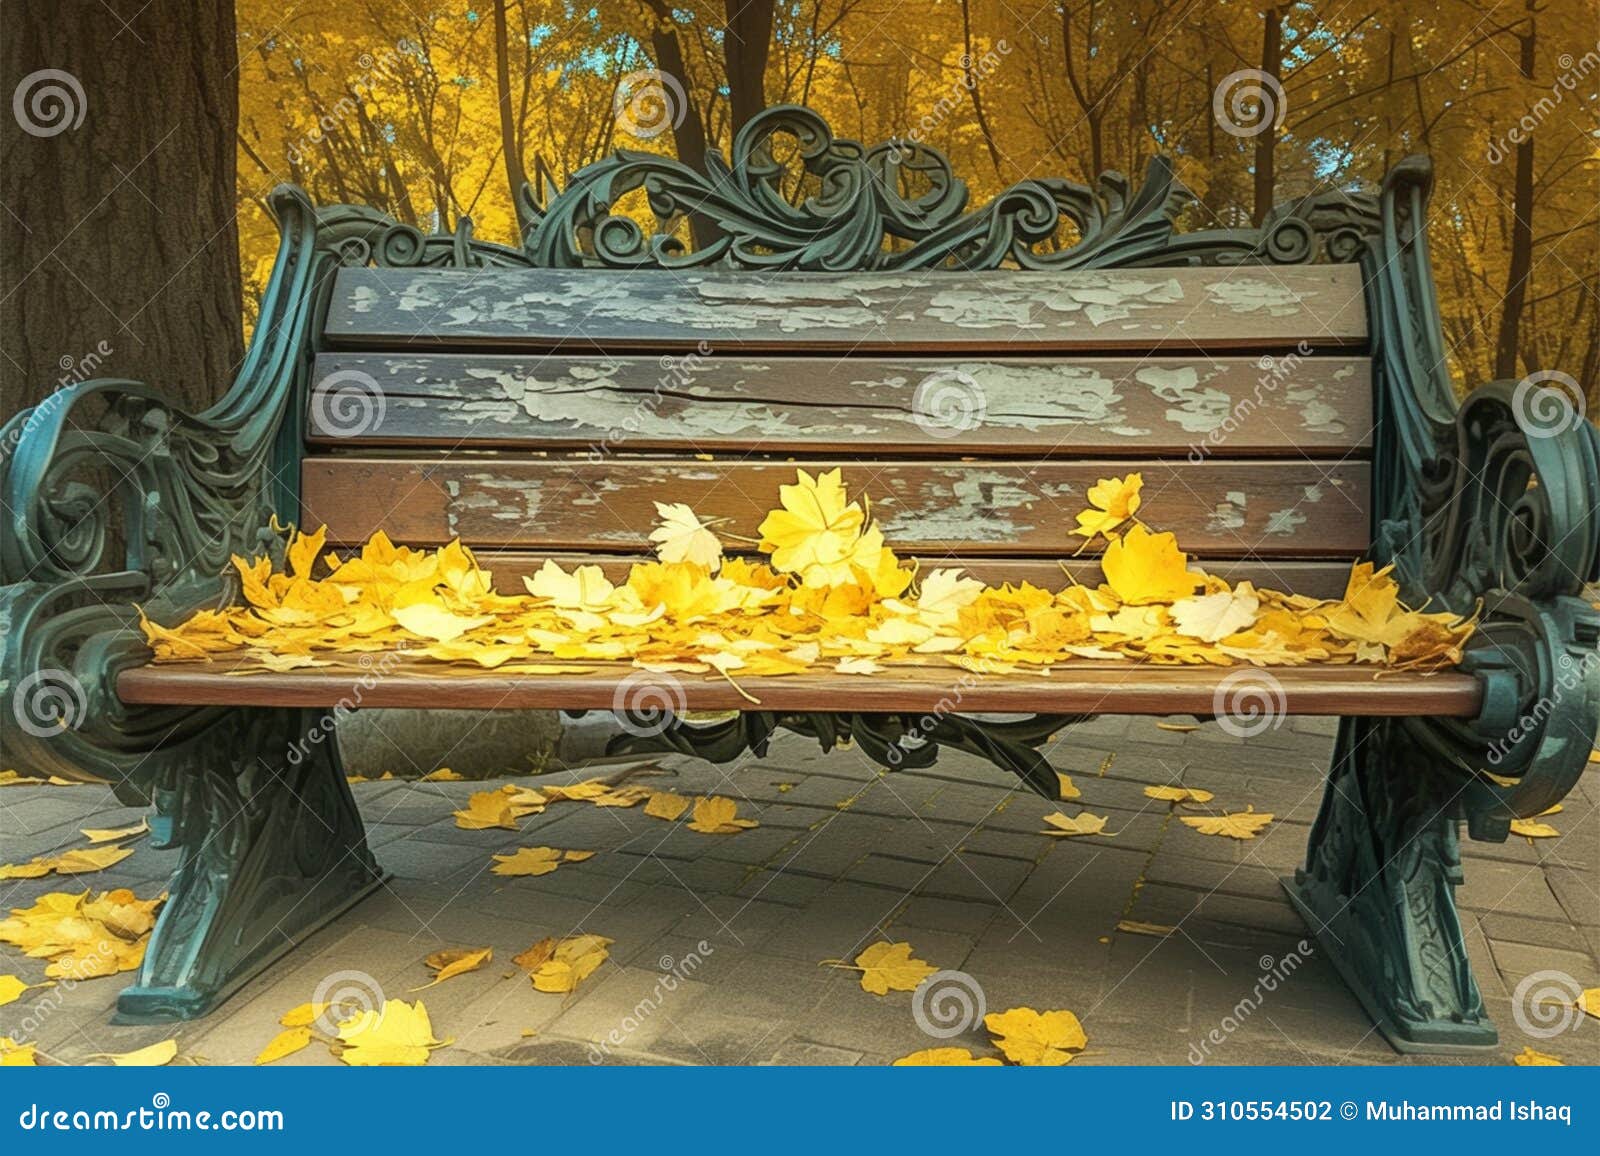 park bench with metal sidewall, adorned with yellow autumn leaves